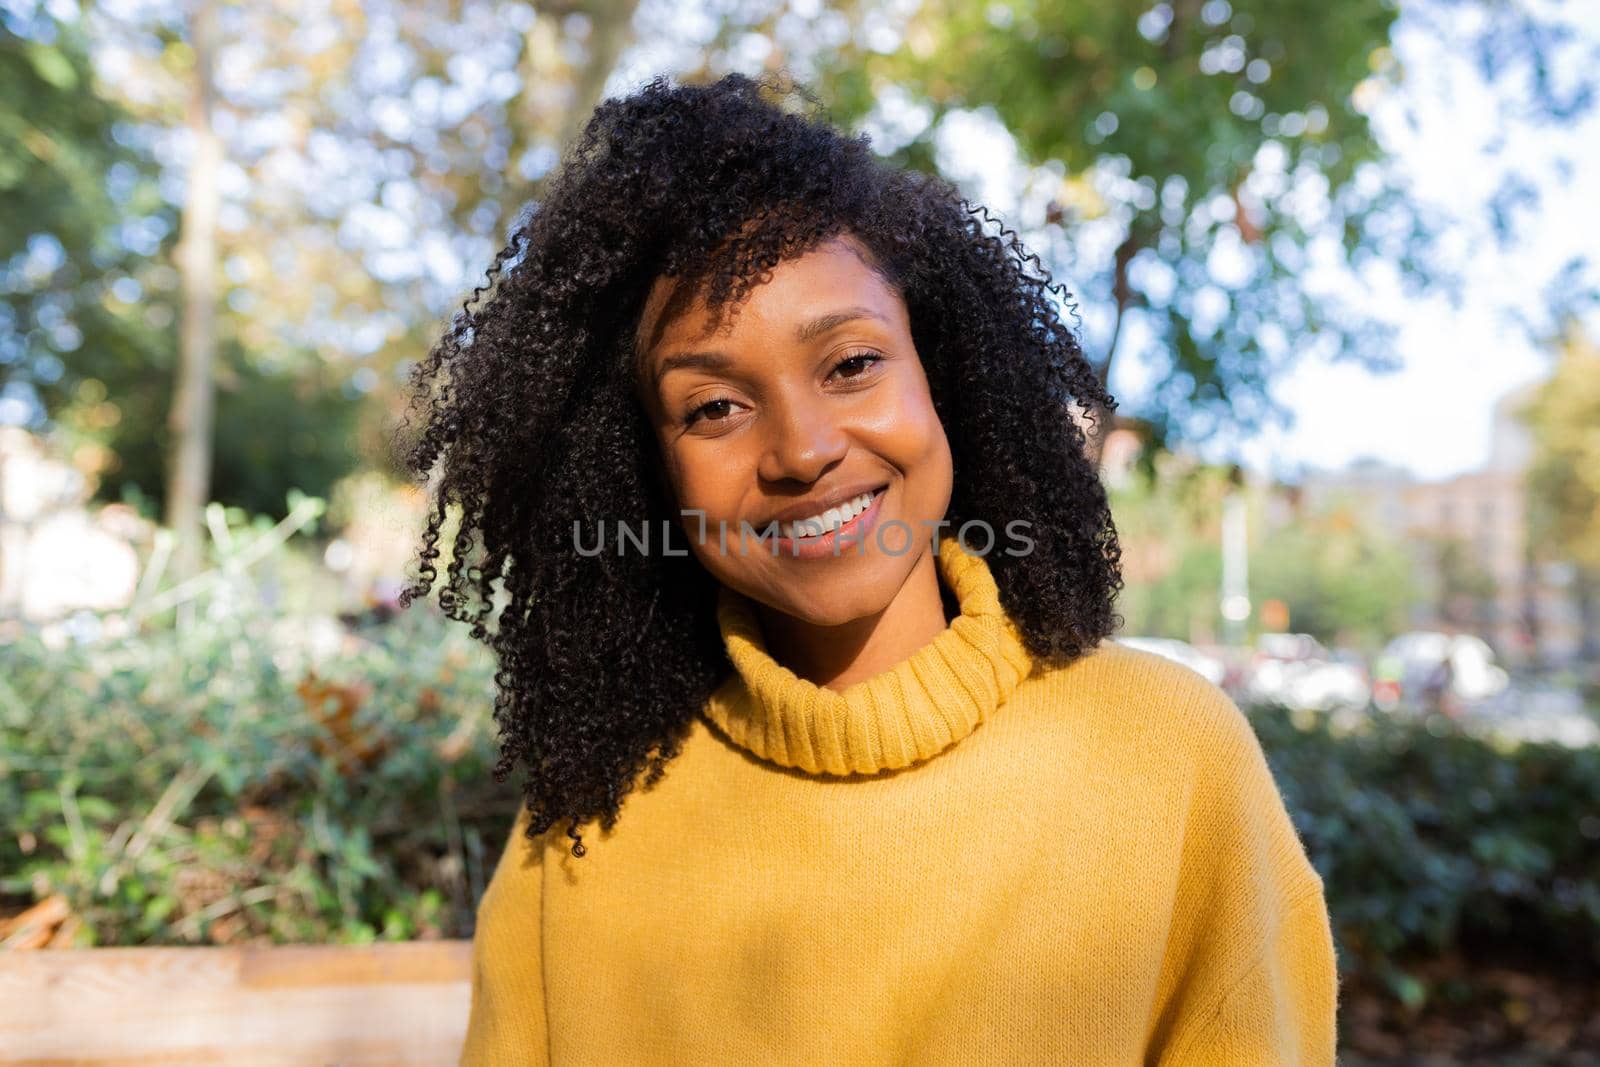 Portrait of smiling African American woman looking at camera wearing yellow sweater in a park. by Hoverstock